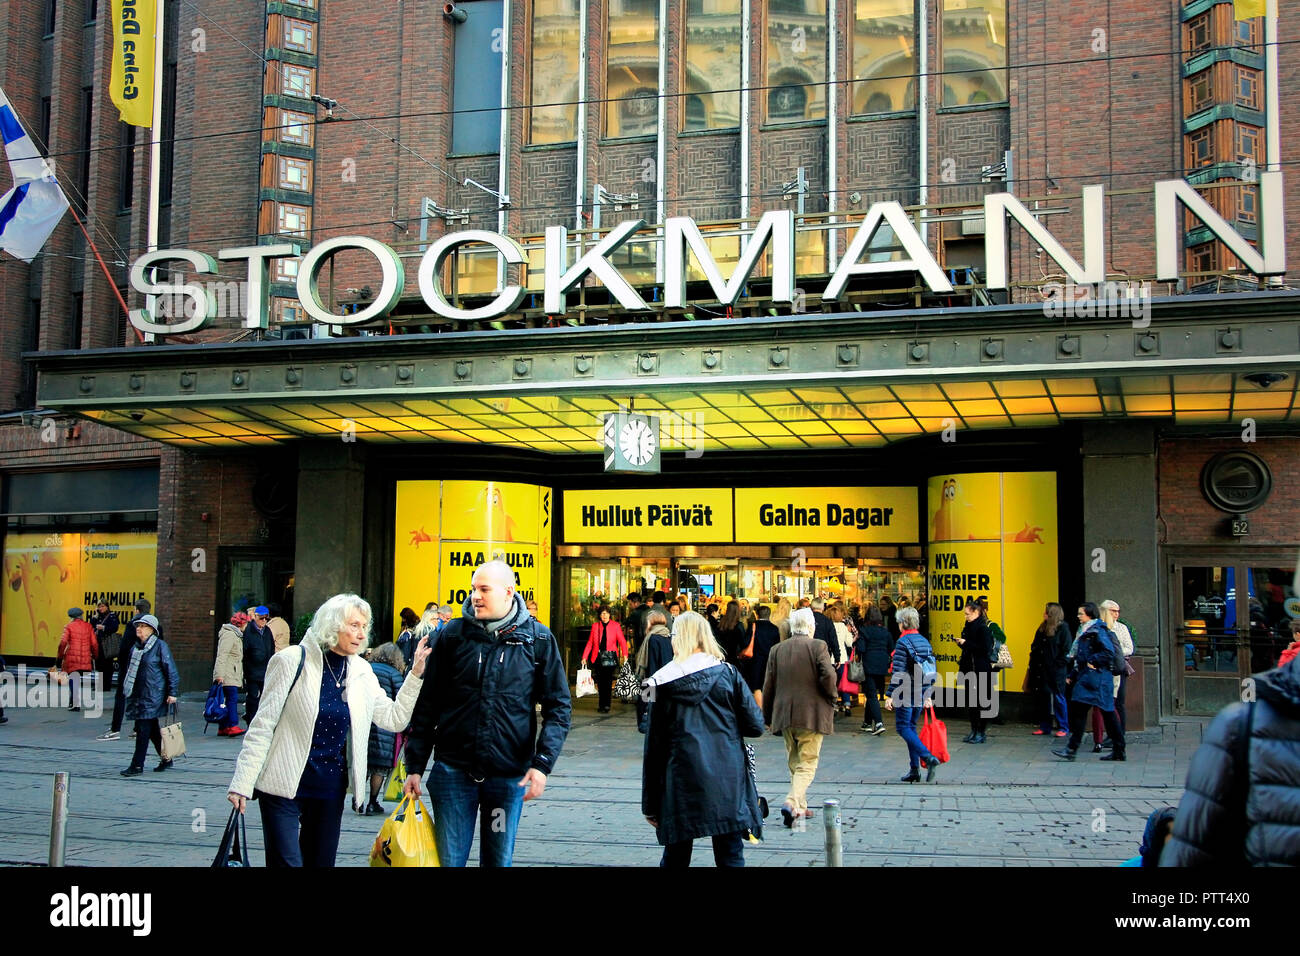 Helsinki, Finland - October 10, 2018: Crazy Days, the biannual, massive and popular 5-day sale event at Stockmann department store begins. In photo the yellow entrance of Stockmann's flagship store in Helsinki. Credit: Taina Sohlman/Alamy Live News Stock Photo